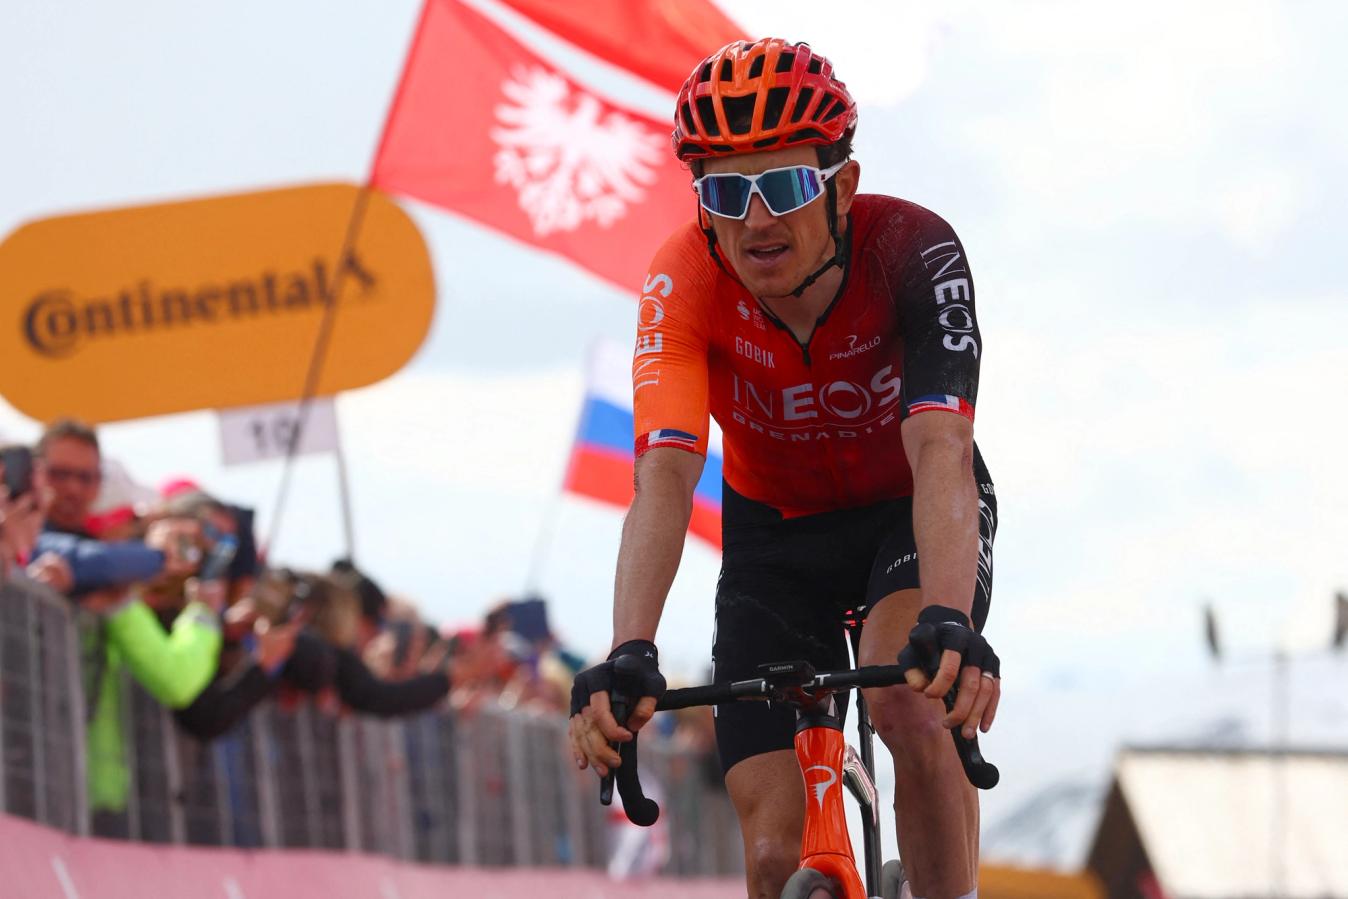 Geraint Thomas can fill the gap of Luke Rowe as Ineos' road captain